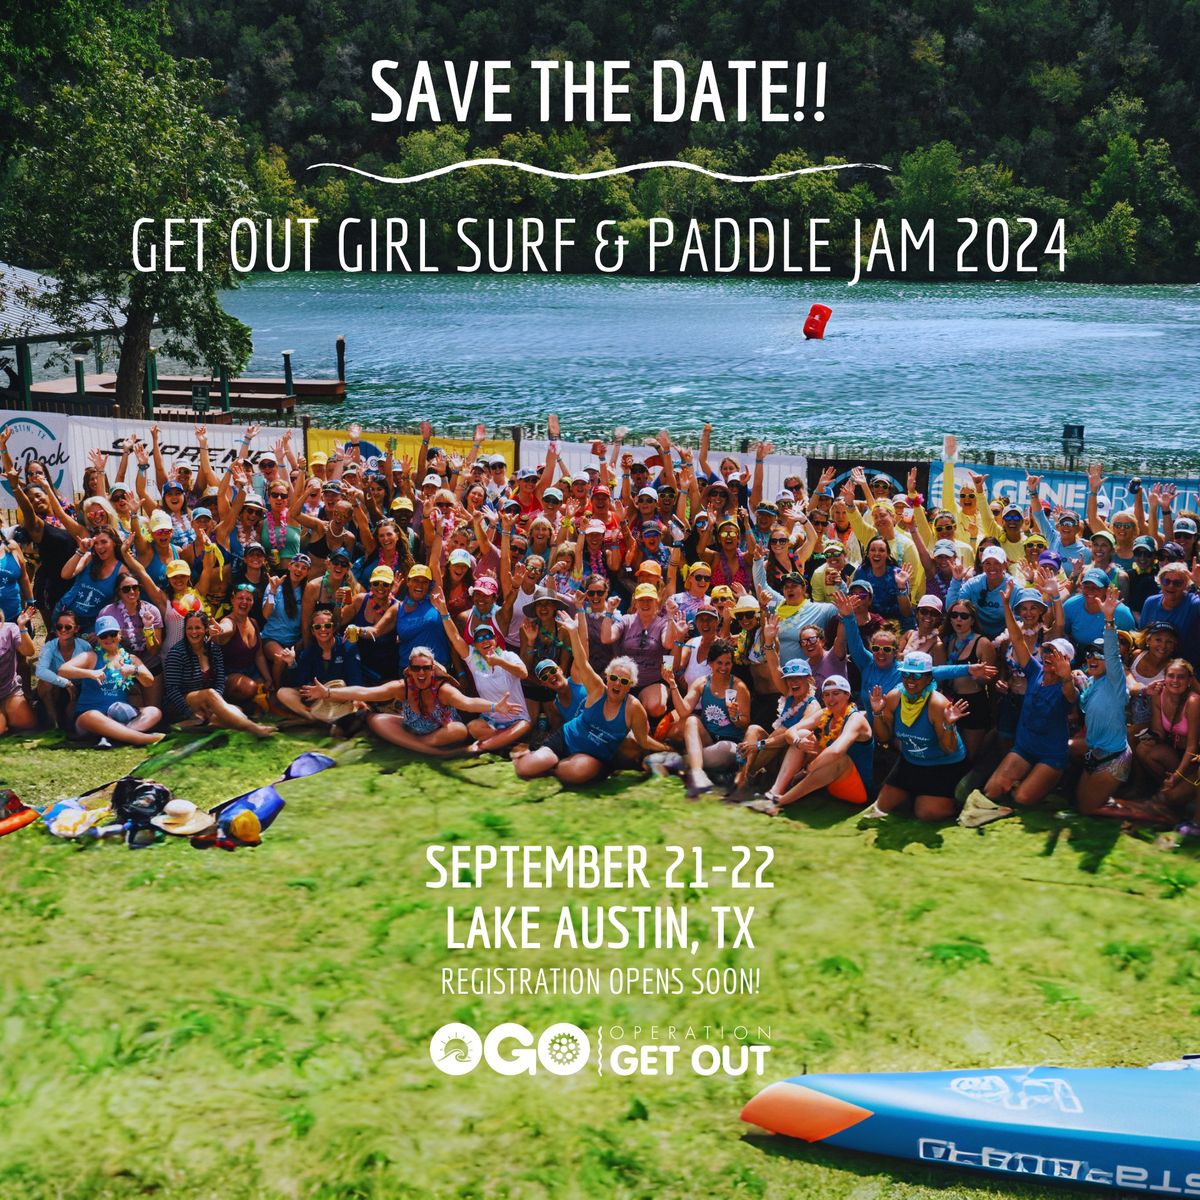 Get Out Girl Surf & Paddle Jam 2024